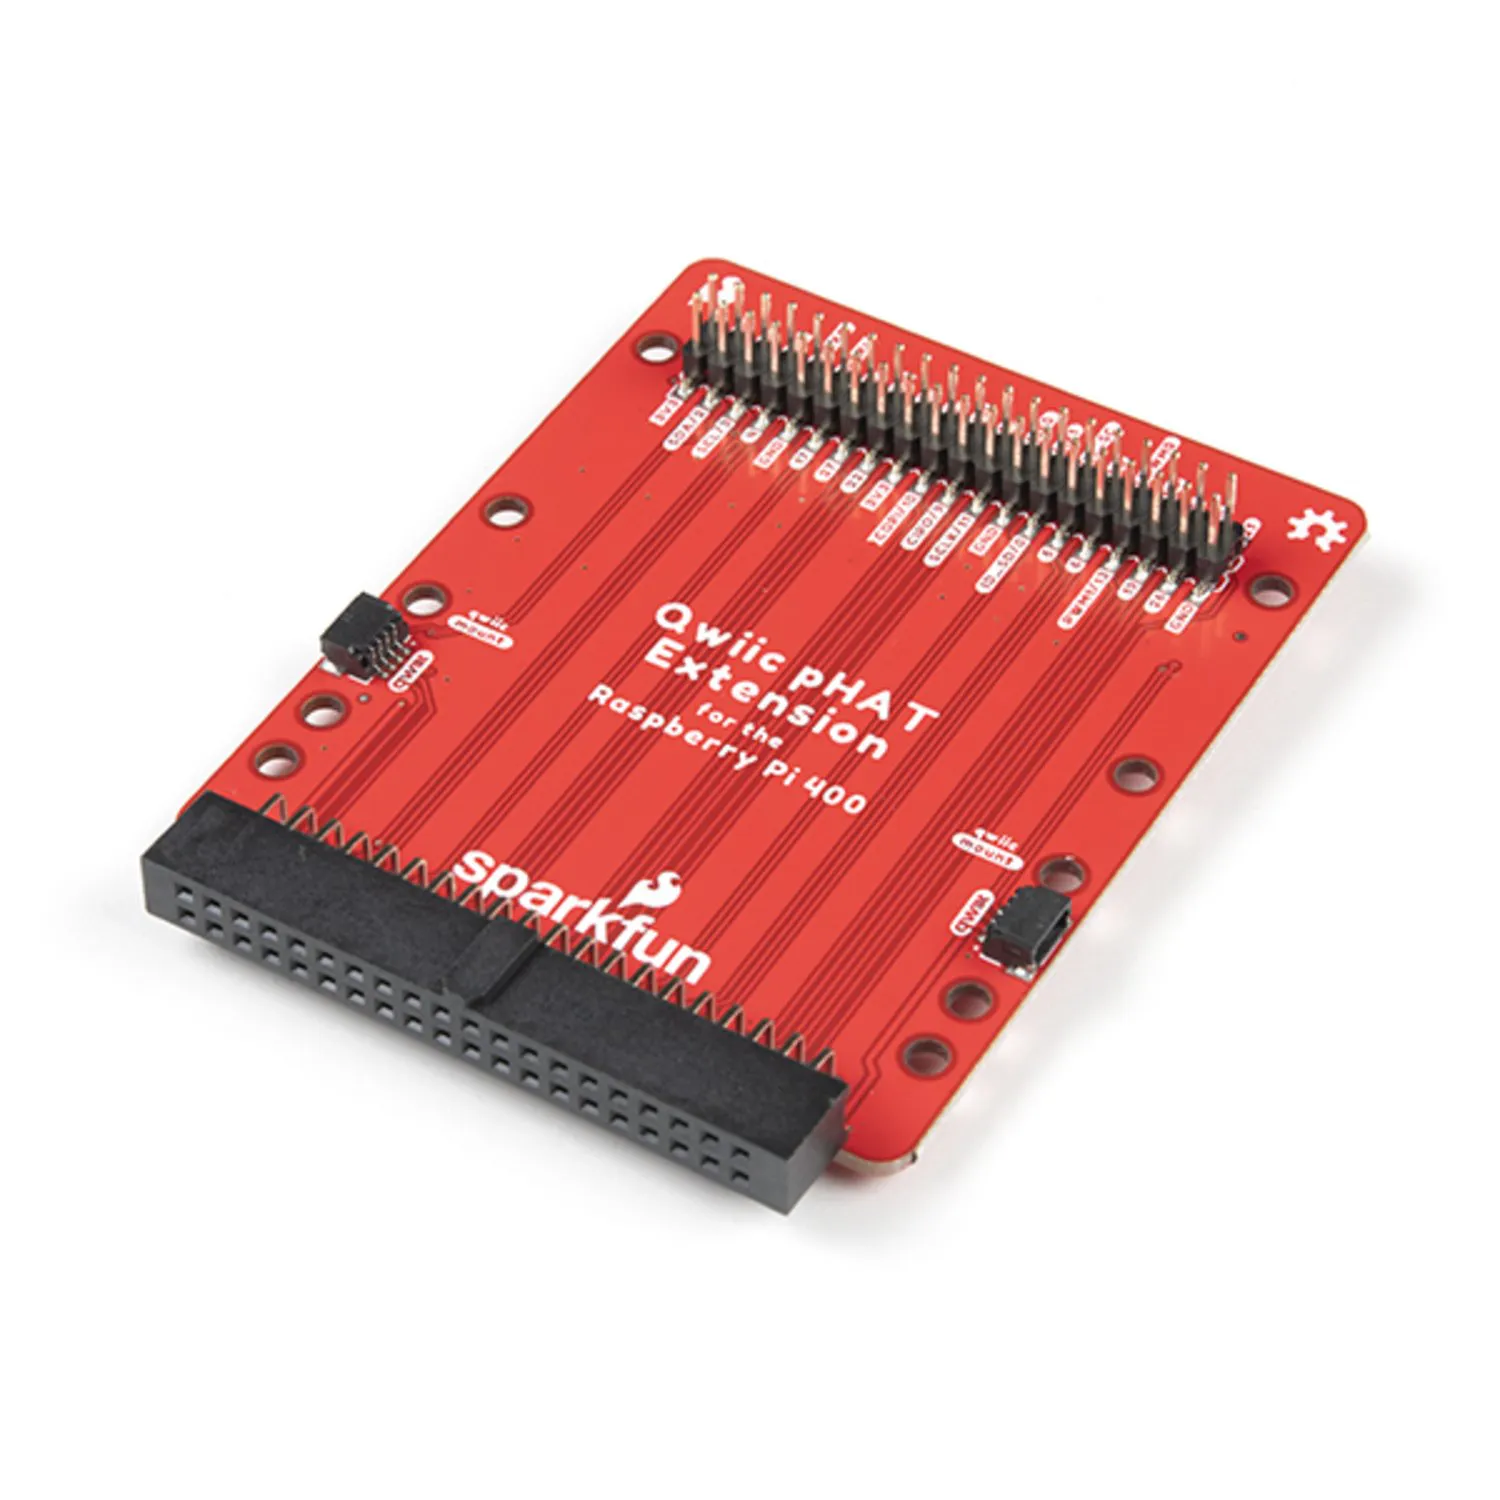 Photo of SparkFun Qwiic pHAT Extension for Raspberry Pi 400